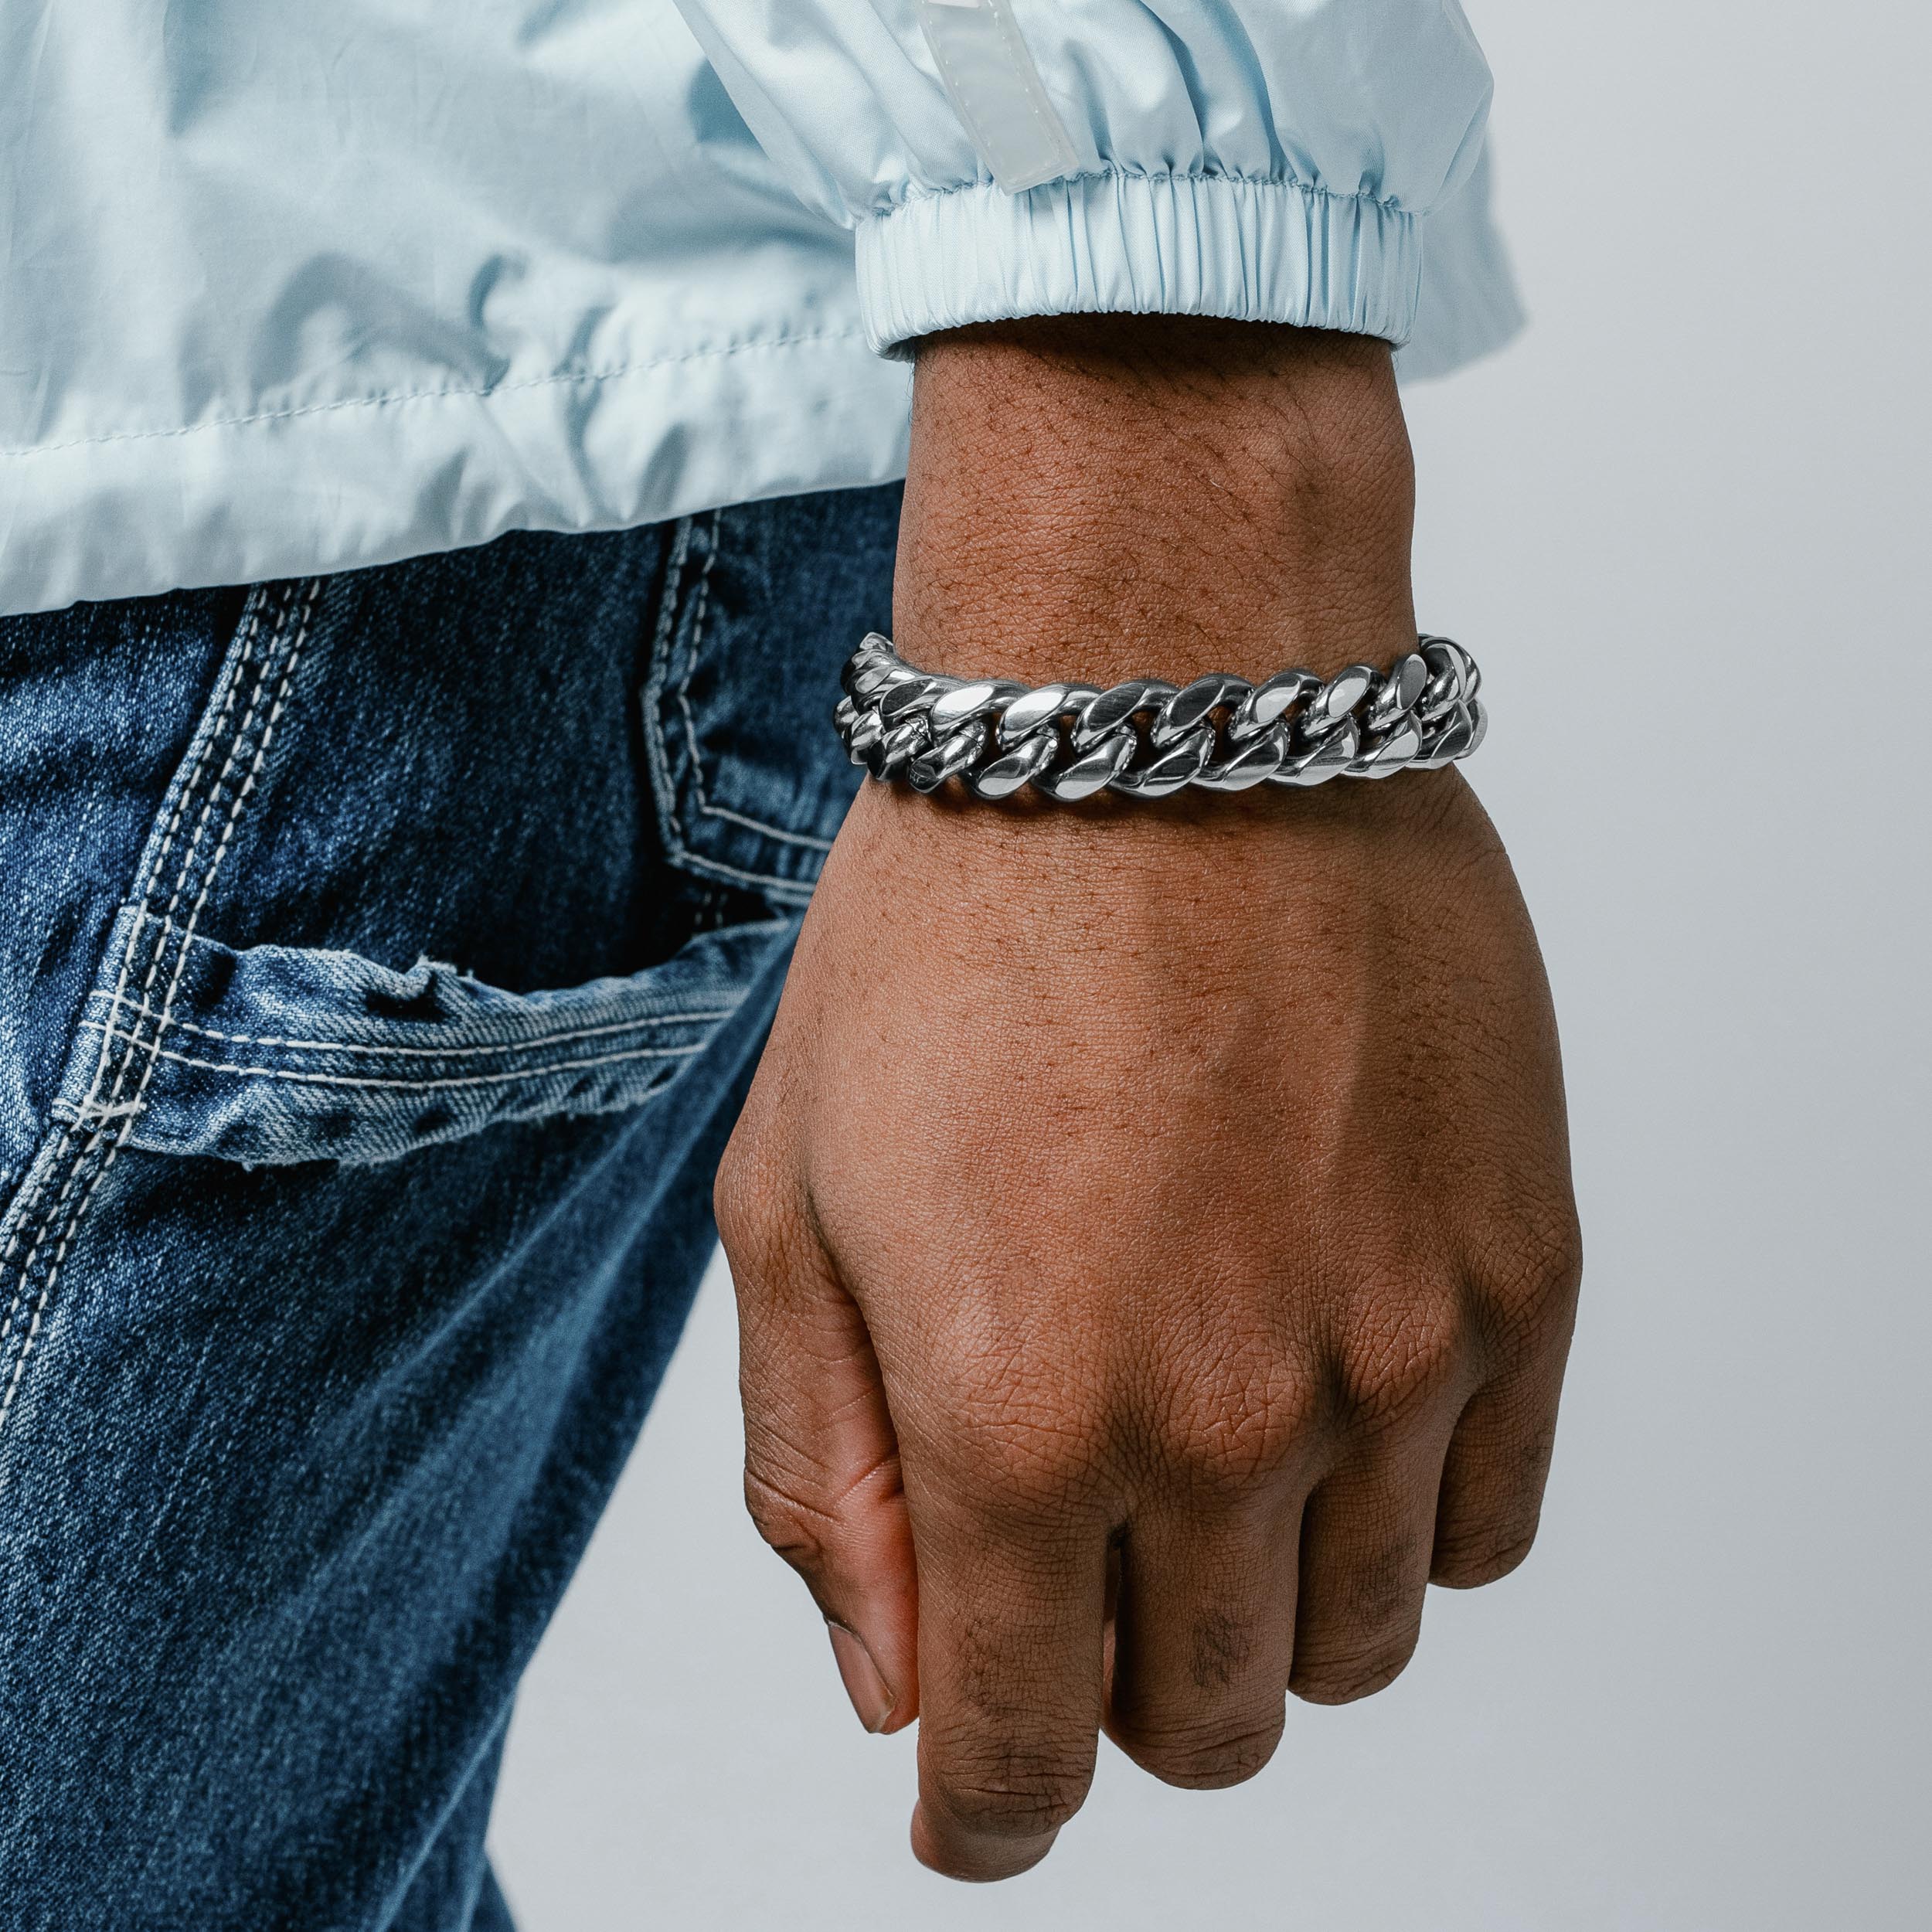 Vitaly React Bracelet | 100% Recycled Stainless Steel Accessories